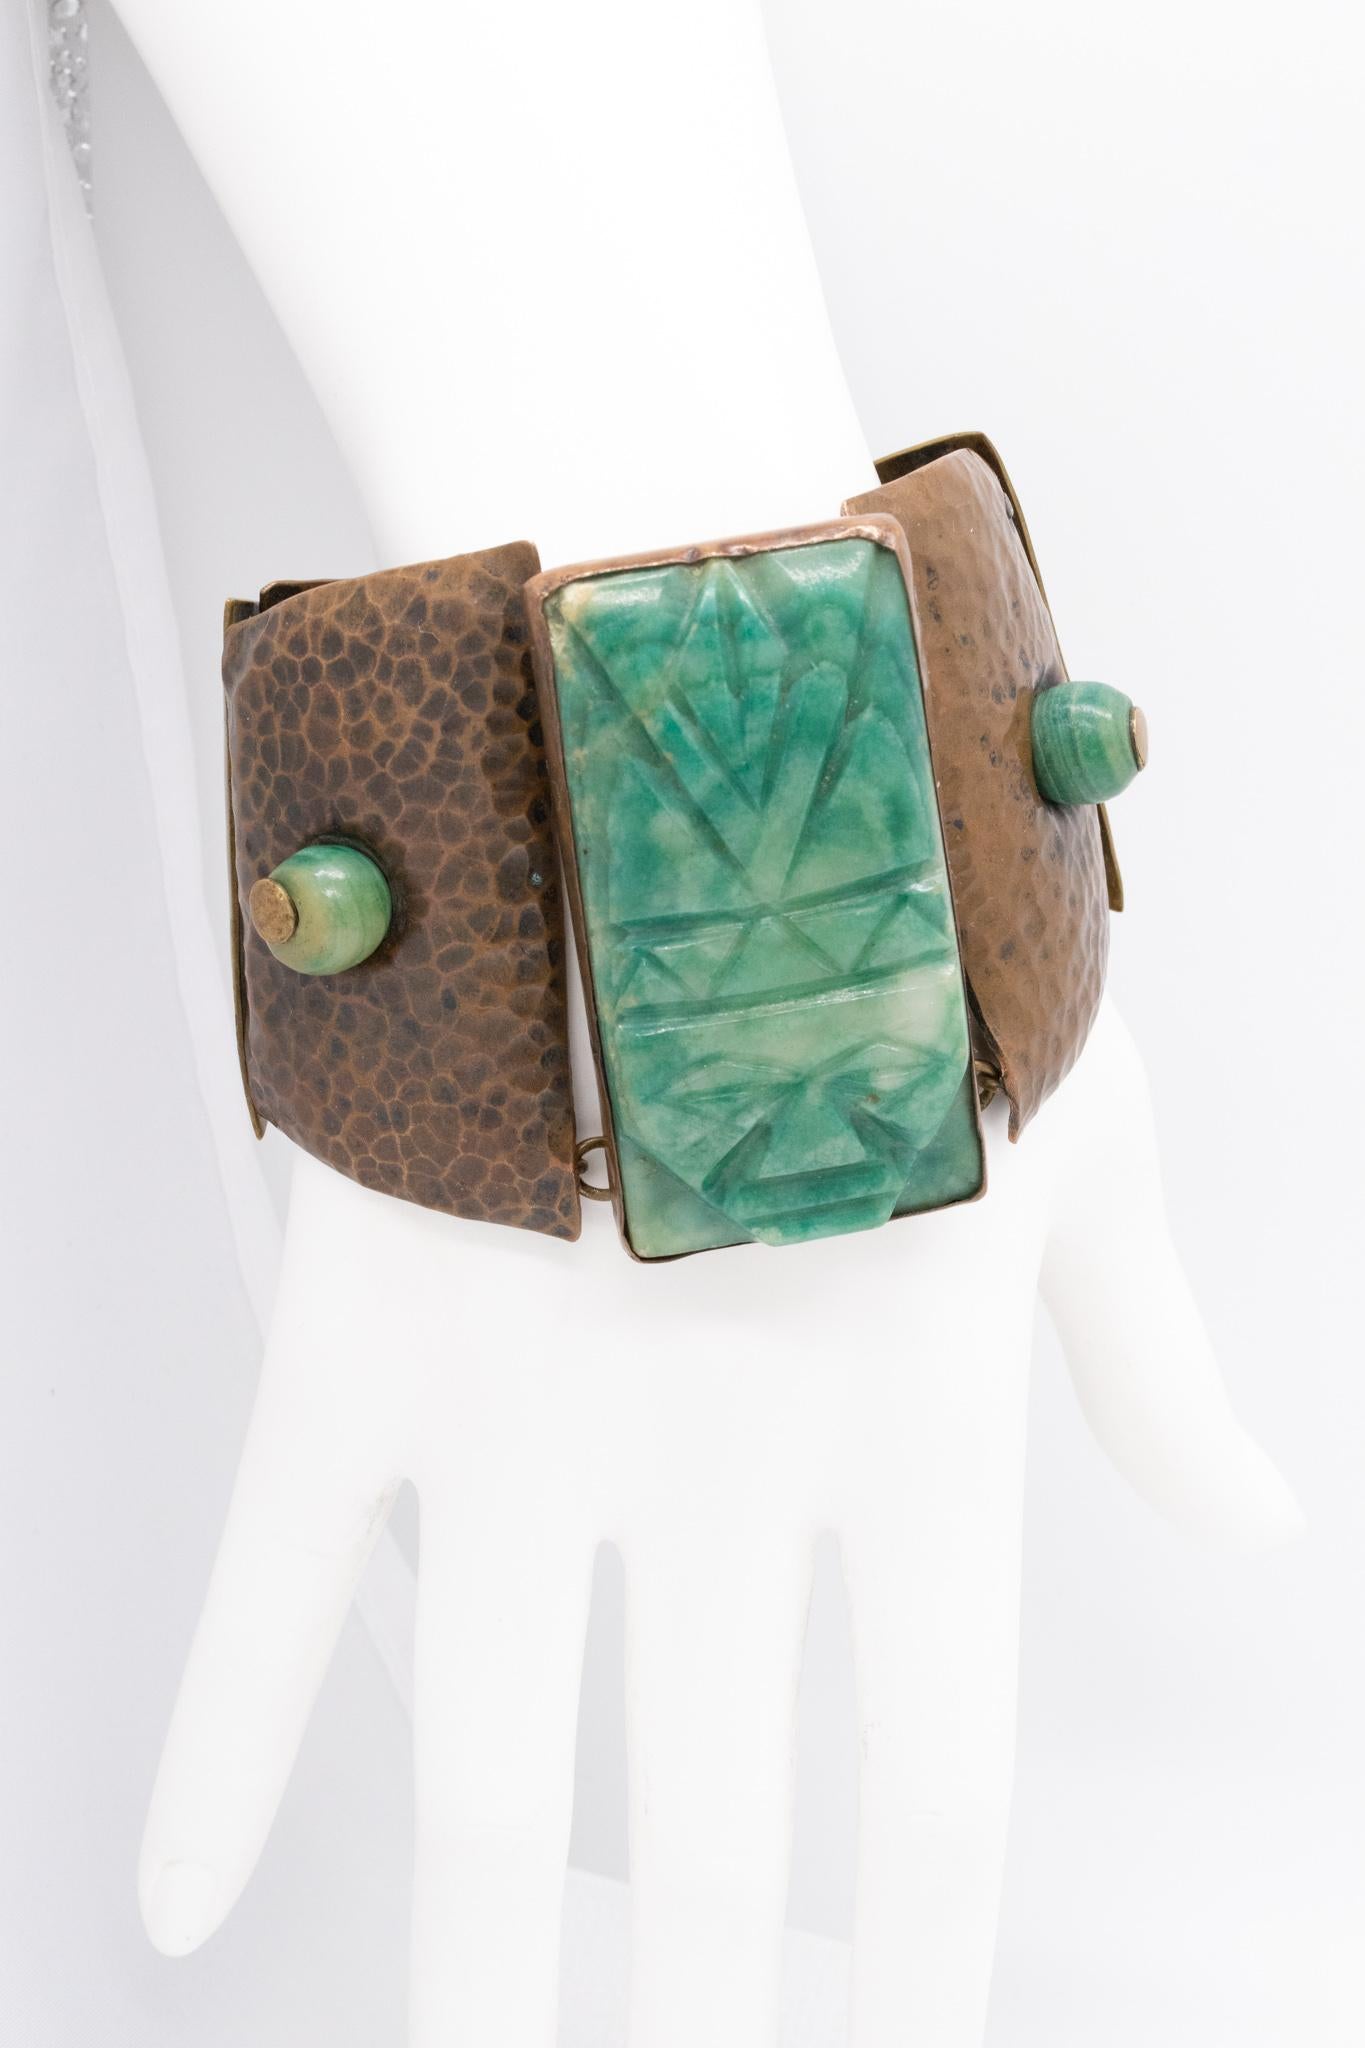 Statement bracelet designed by Casa De Maya

A rare vintage piece, created in Mexico during the mid-century back in the 1950. Crafted at the atelier of Casa De Maya with mixed metals such hammered copper and polished brass. This flexible bracelet